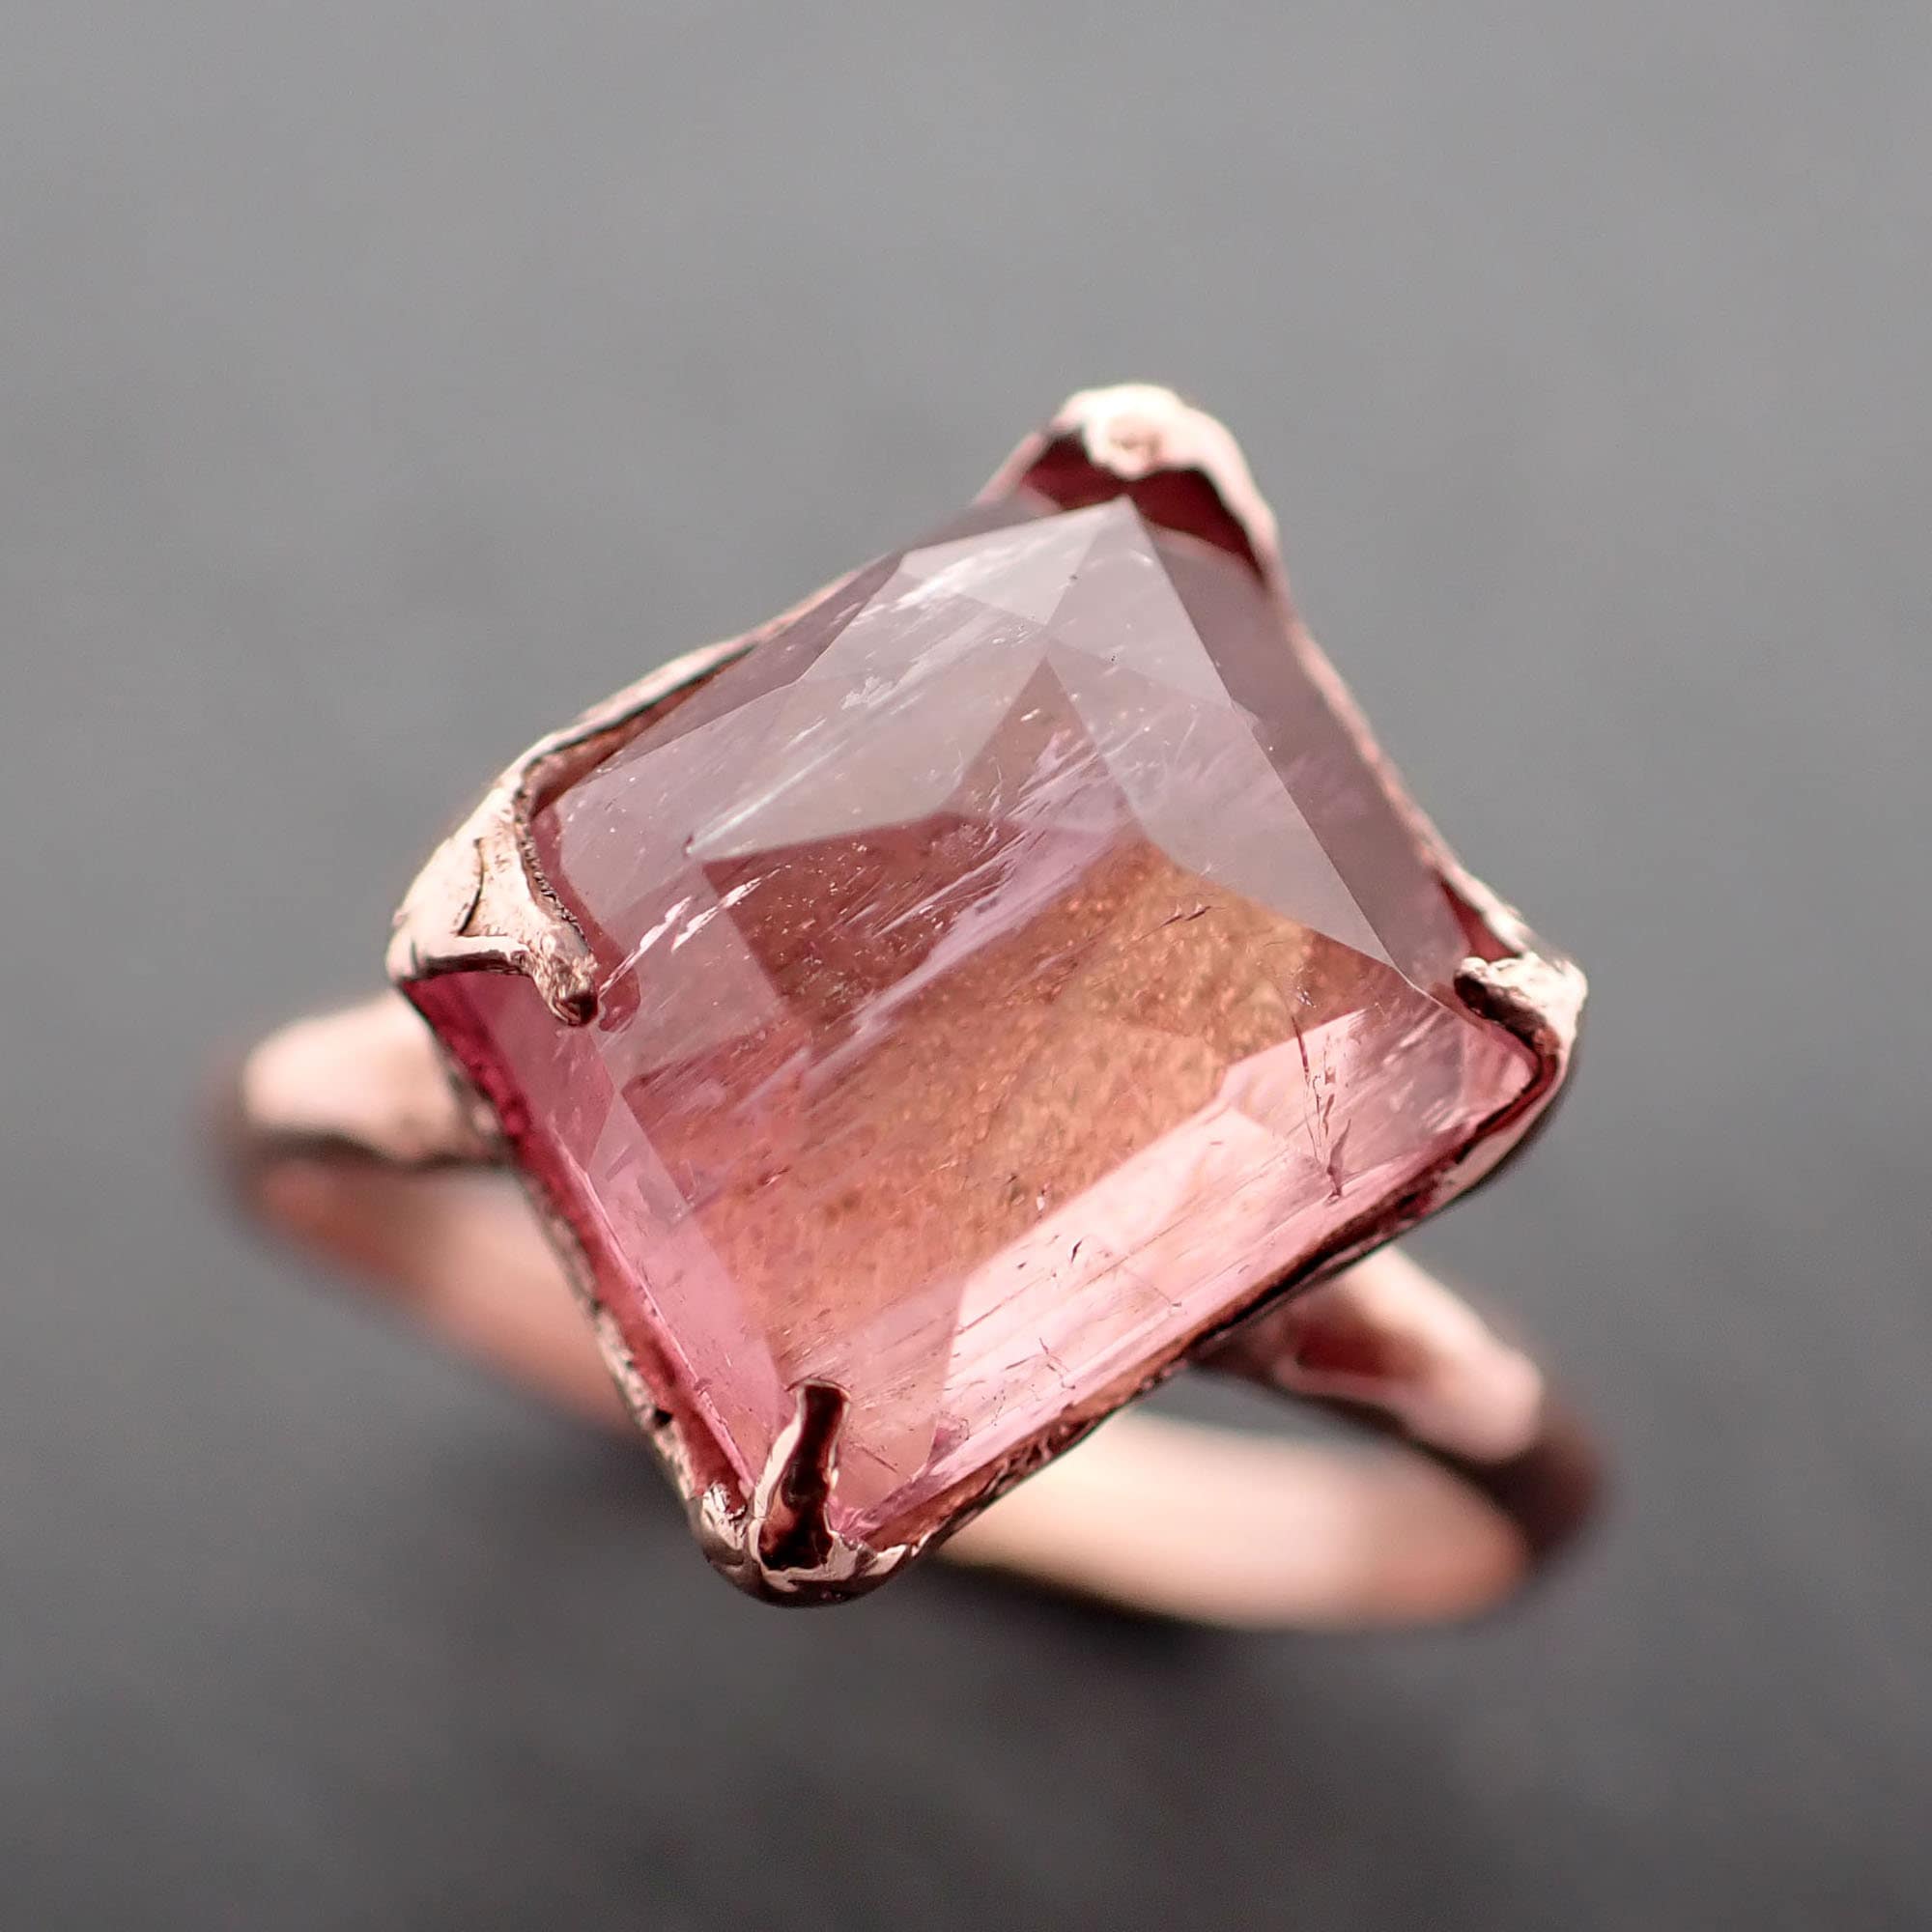 Fancy cut pink Tourmaline Rose Gold Ring Gemstone Solitaire recycled 14k statement cocktail statement 3389